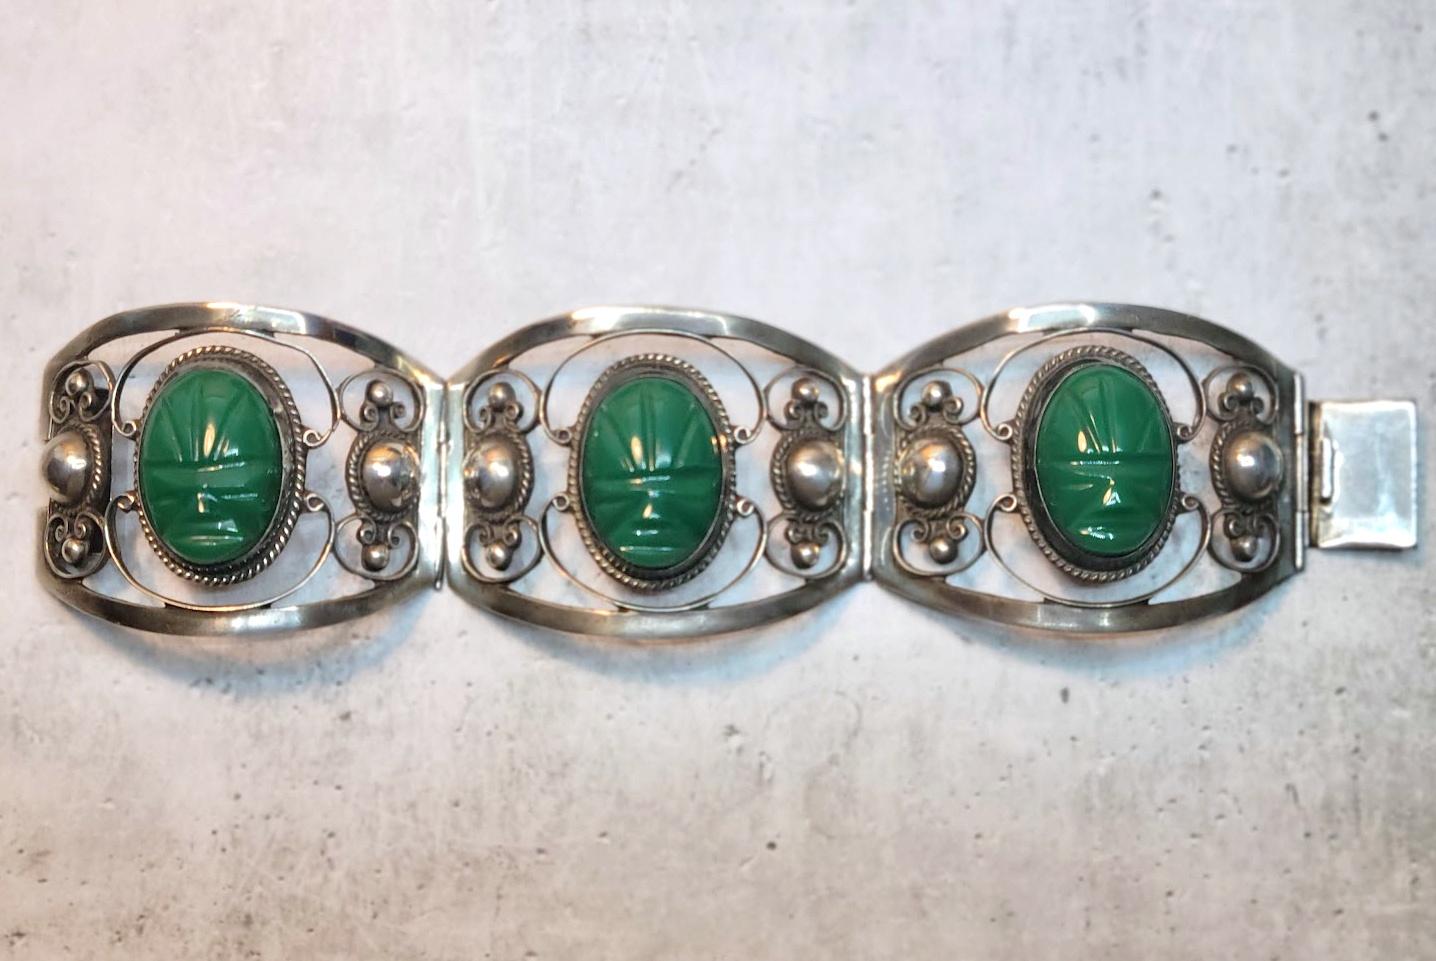 A Mexican bracelet comprised of fine sterling silver with green onyx cabochons in the form of Aztec masks. The bracelet has decorative silver panels with heavy beading, swirls, and oval onyx Aztec masks.

This vintage panel bracelet was made in